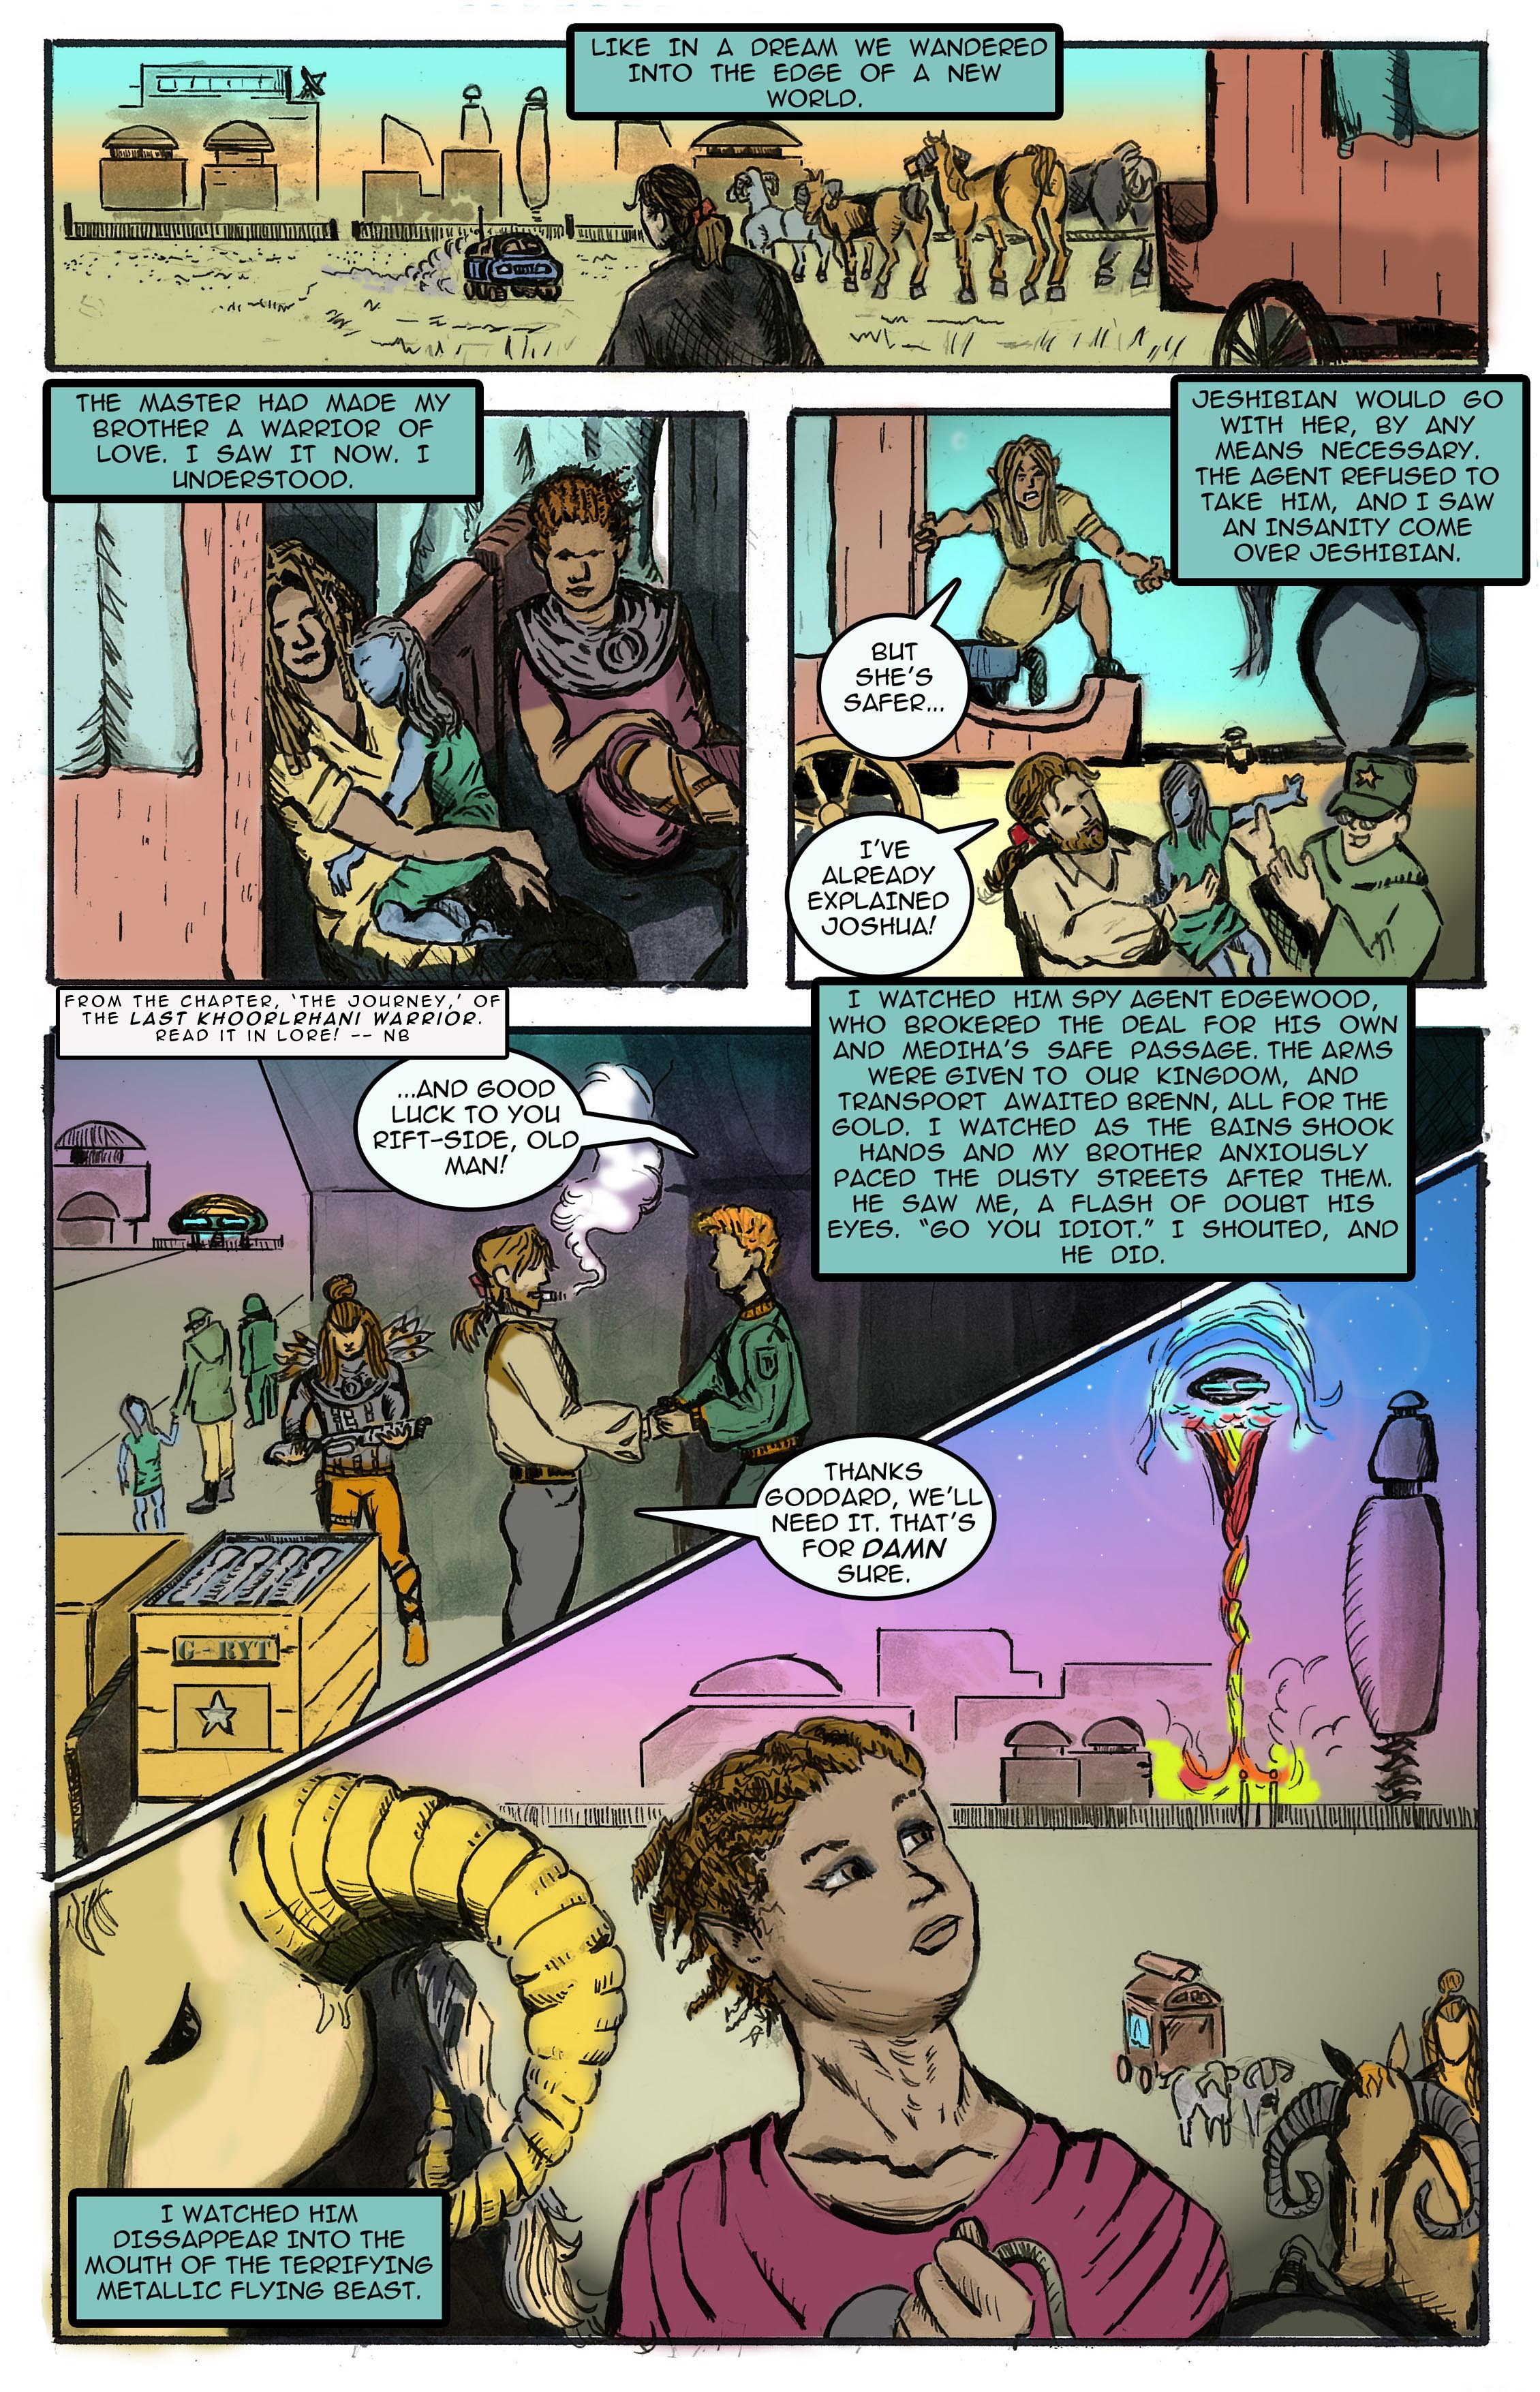 Dreamers of the Great One Land (page 27)